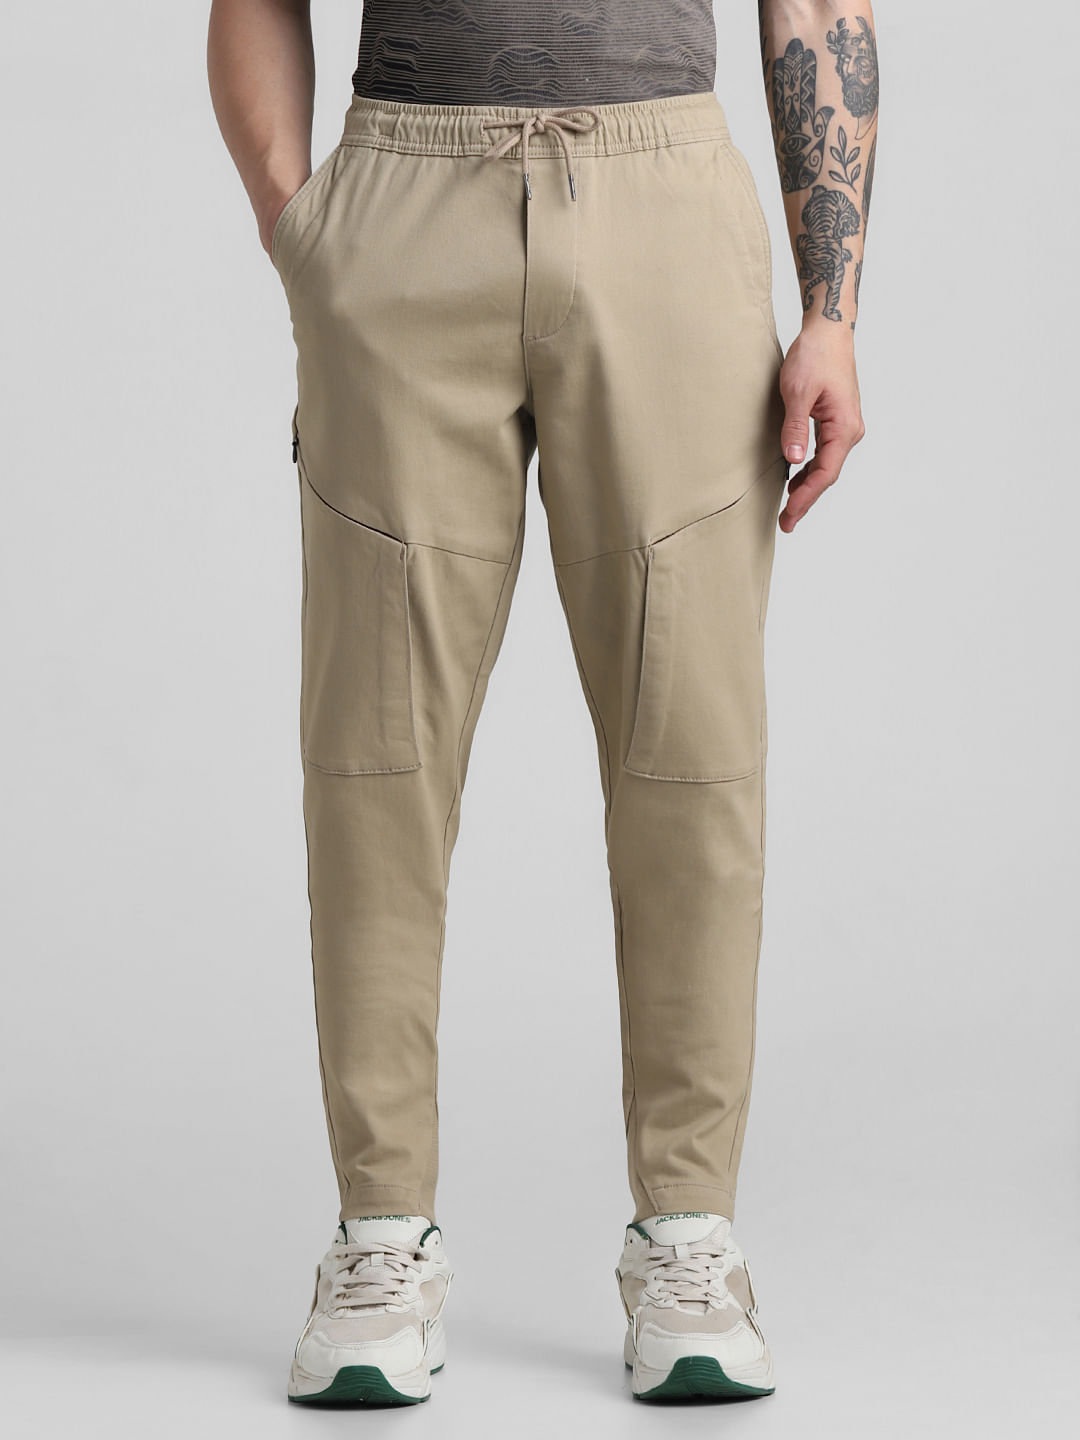 Military cargo pants for sale in Surat, Gujarat , India